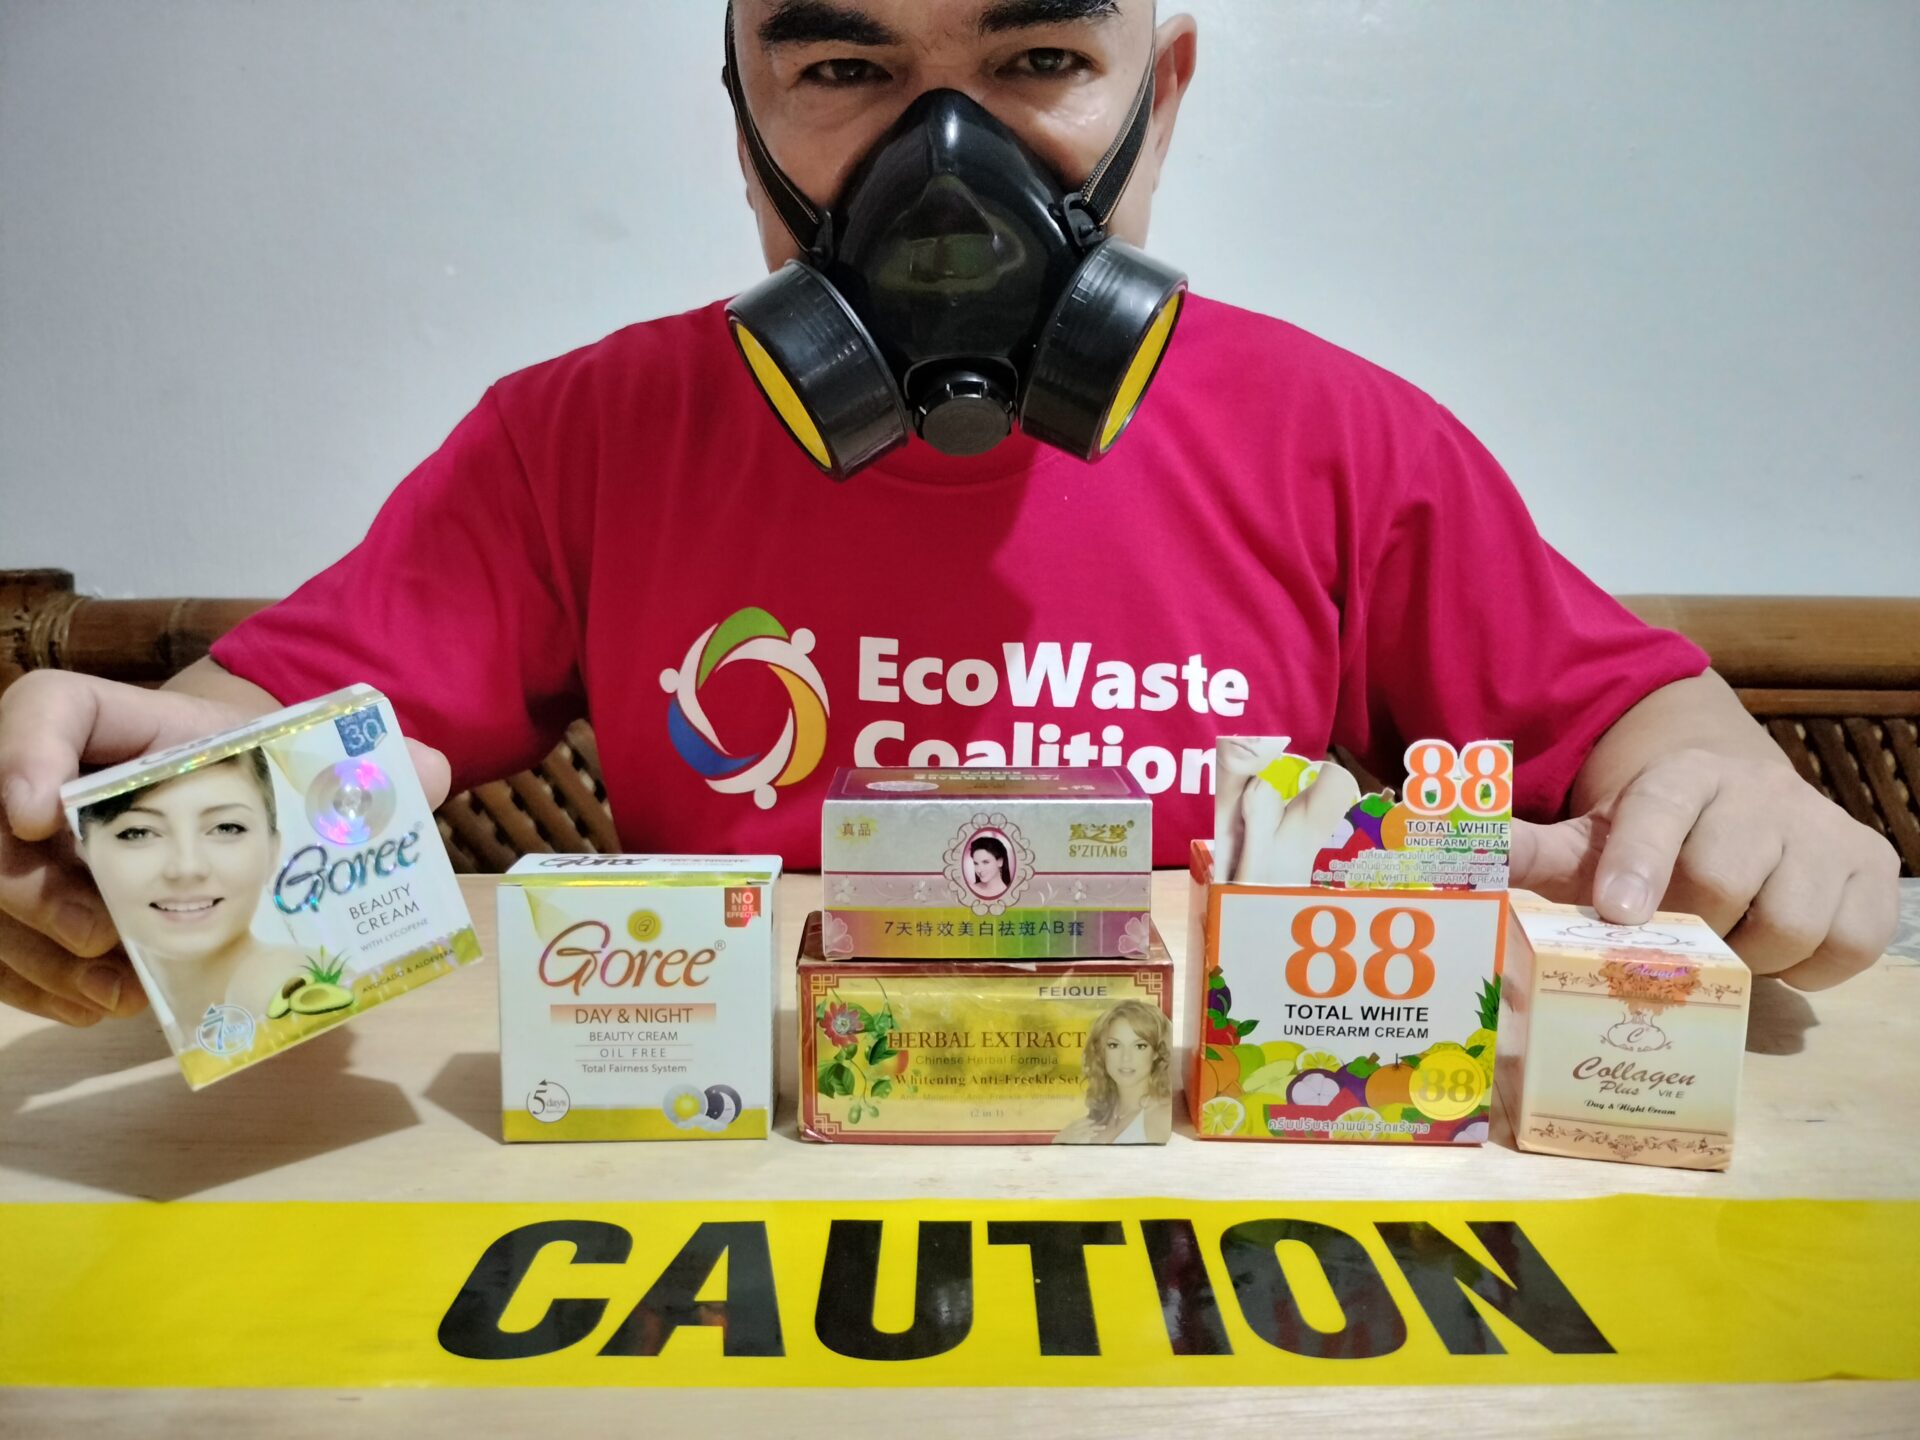 Seven Mercury-Laden Skin Whitening Cosmetics Discovered by the EcoWaste  Coalition Banned by the FDA